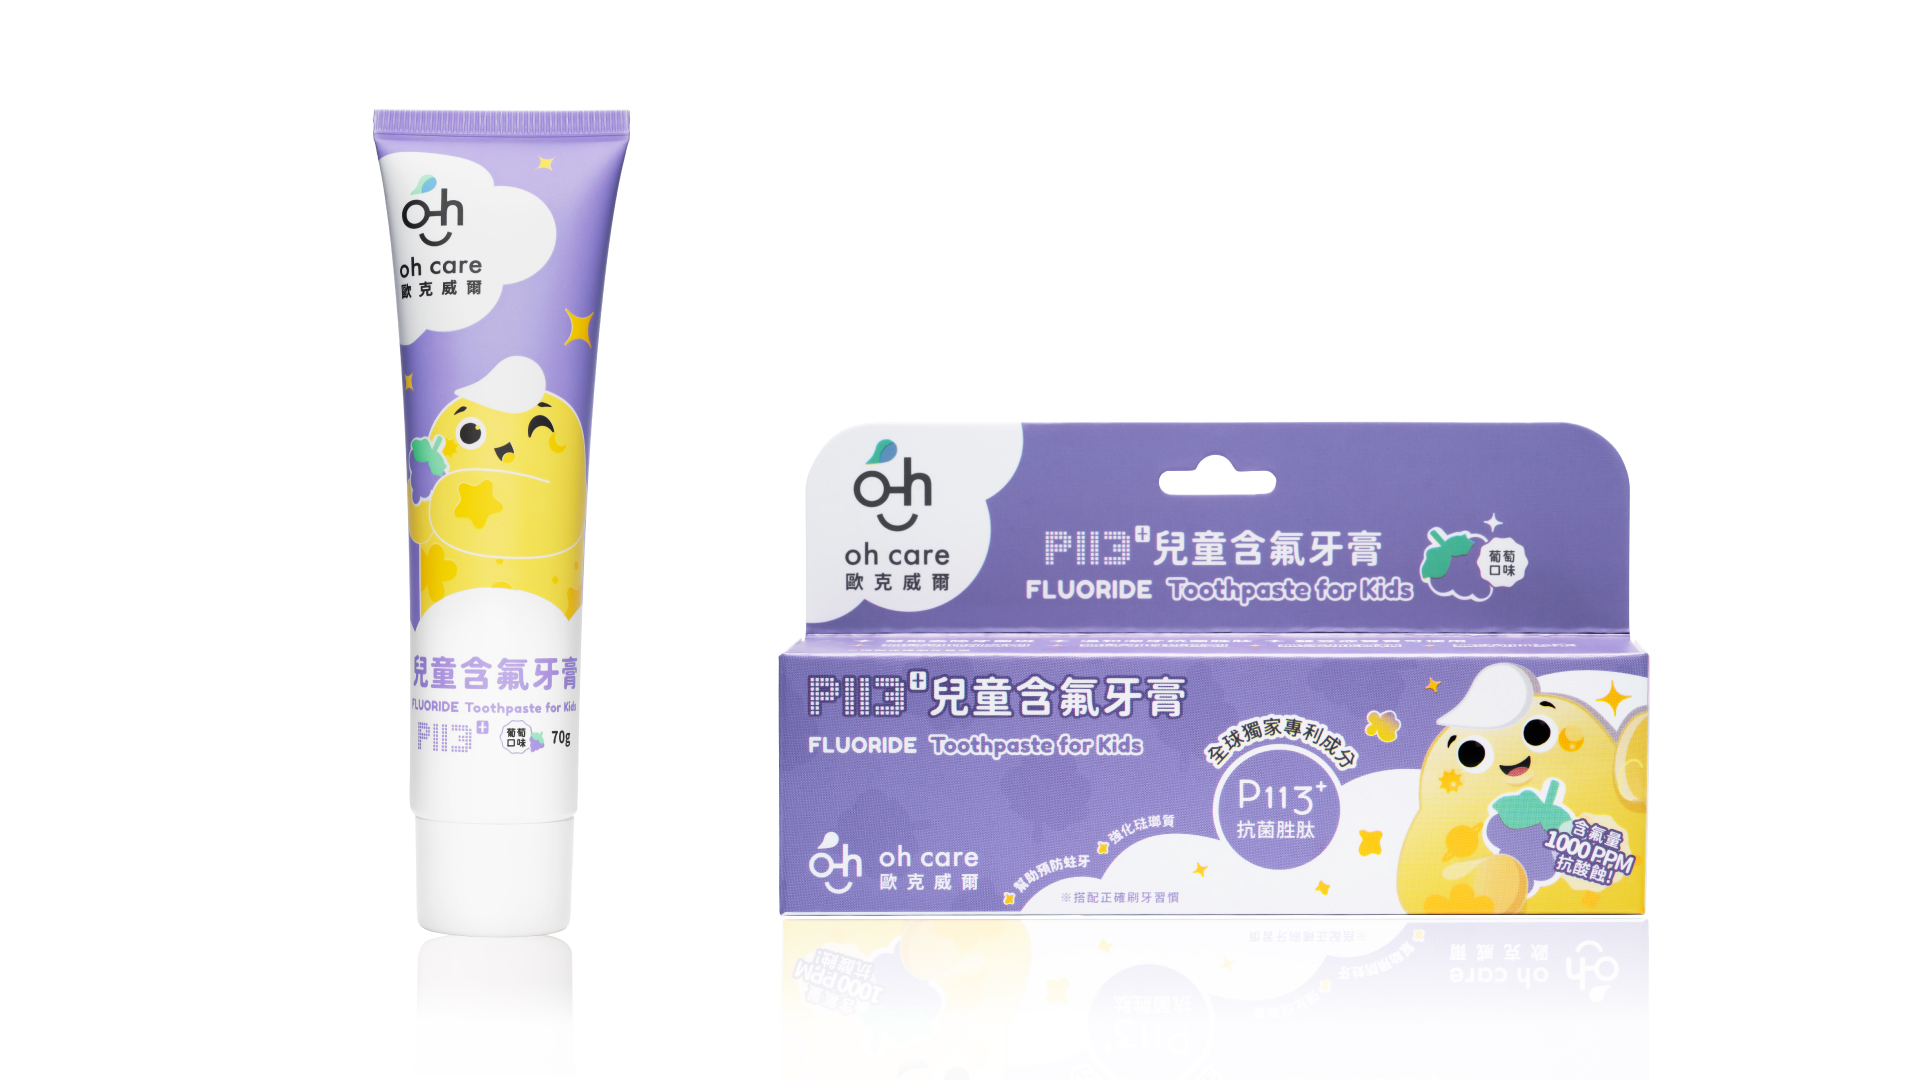 P113+ Antibacterial Peptide Fluoride Toothpaste for Kids [Grape]